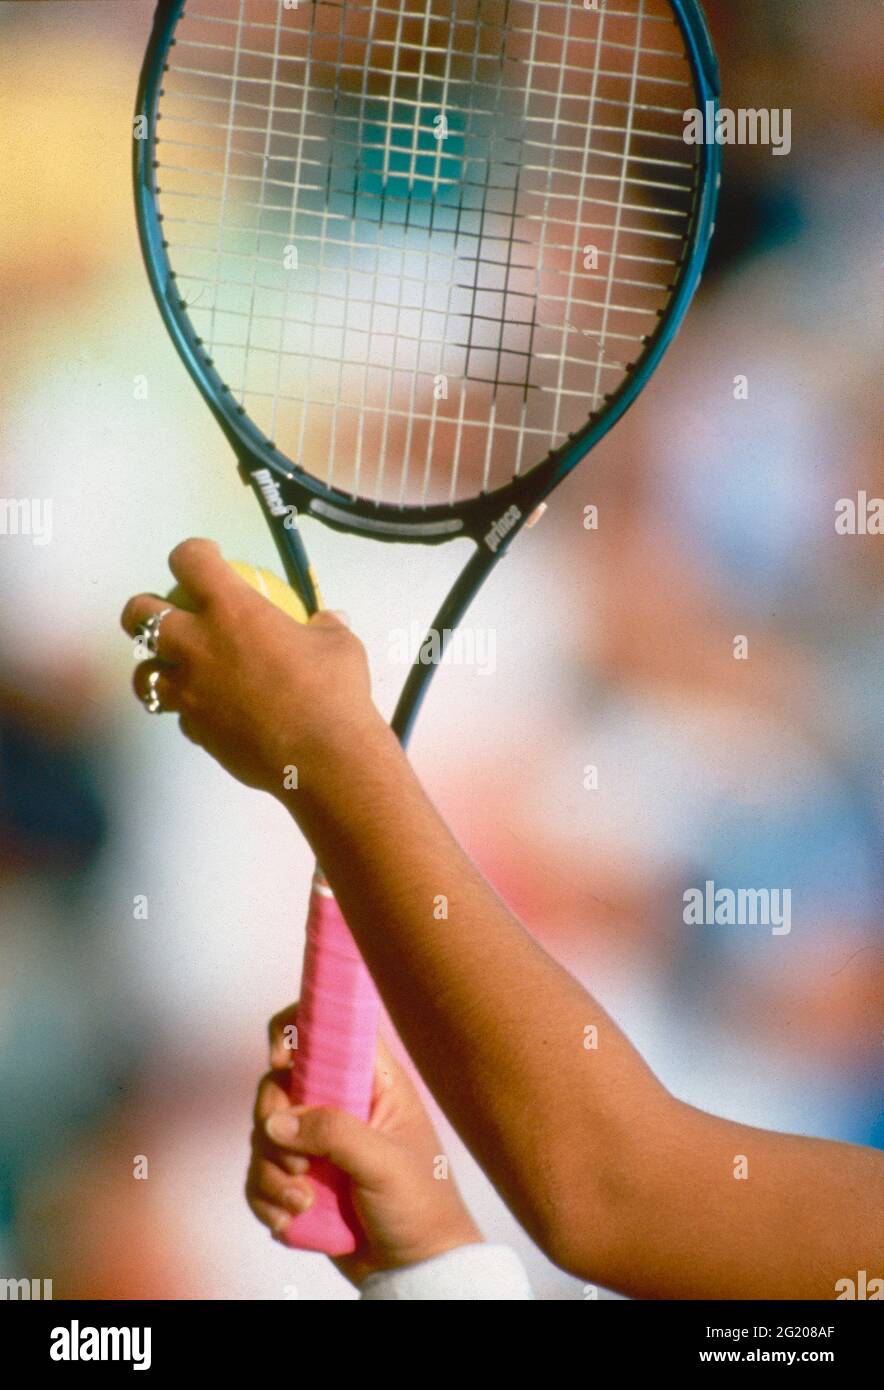 Racket and ball of the tennis player ready for service, Wimbledon, UK 1993 Stock Photo